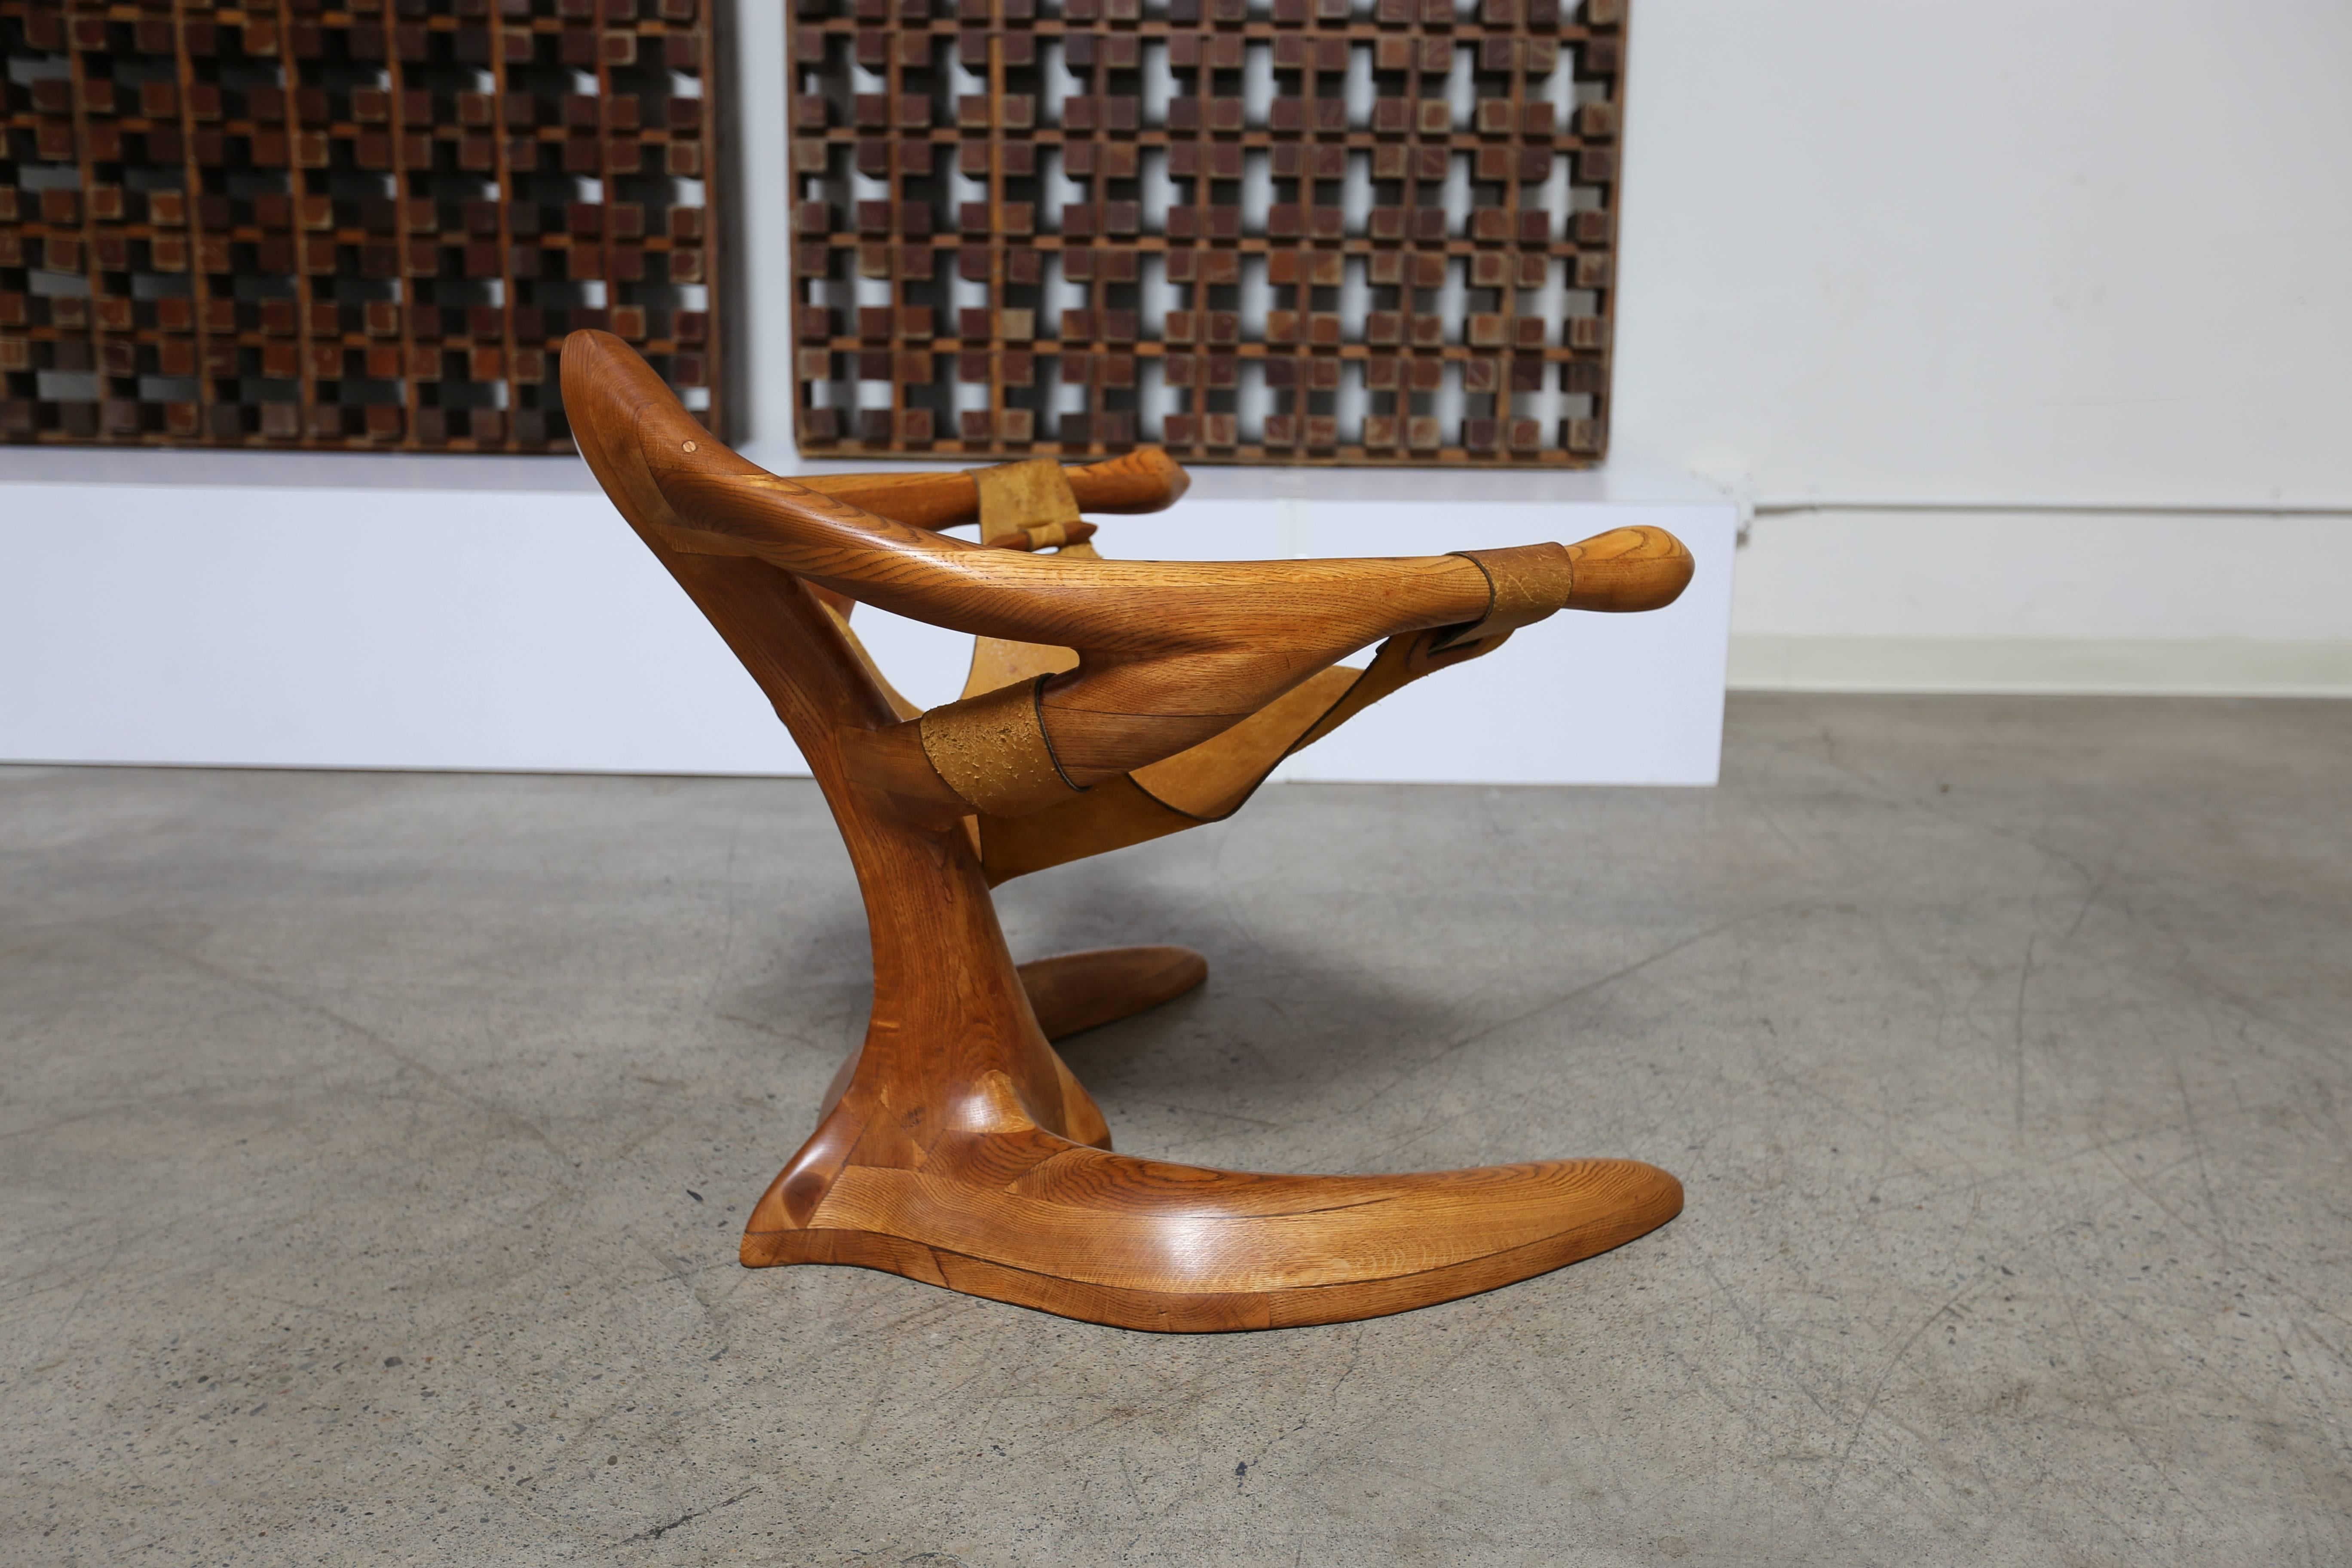 American Studio Crafted Lounge Chair by Californian Woodworker Tim Crowder = MOVING SALE!